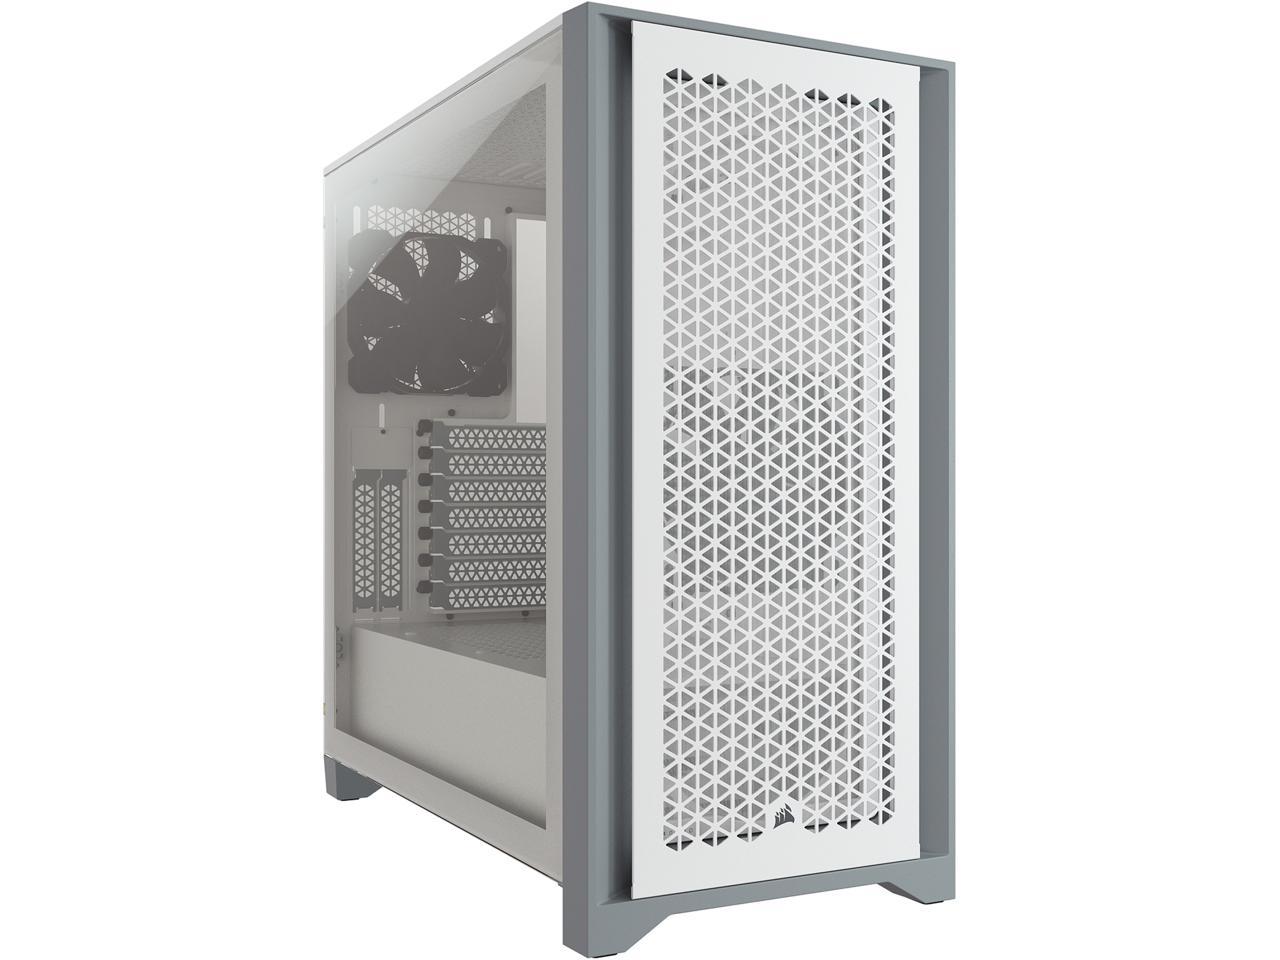 Corsair 4000D Airflow Tempered Glass  Mid Tower Case (White) $80